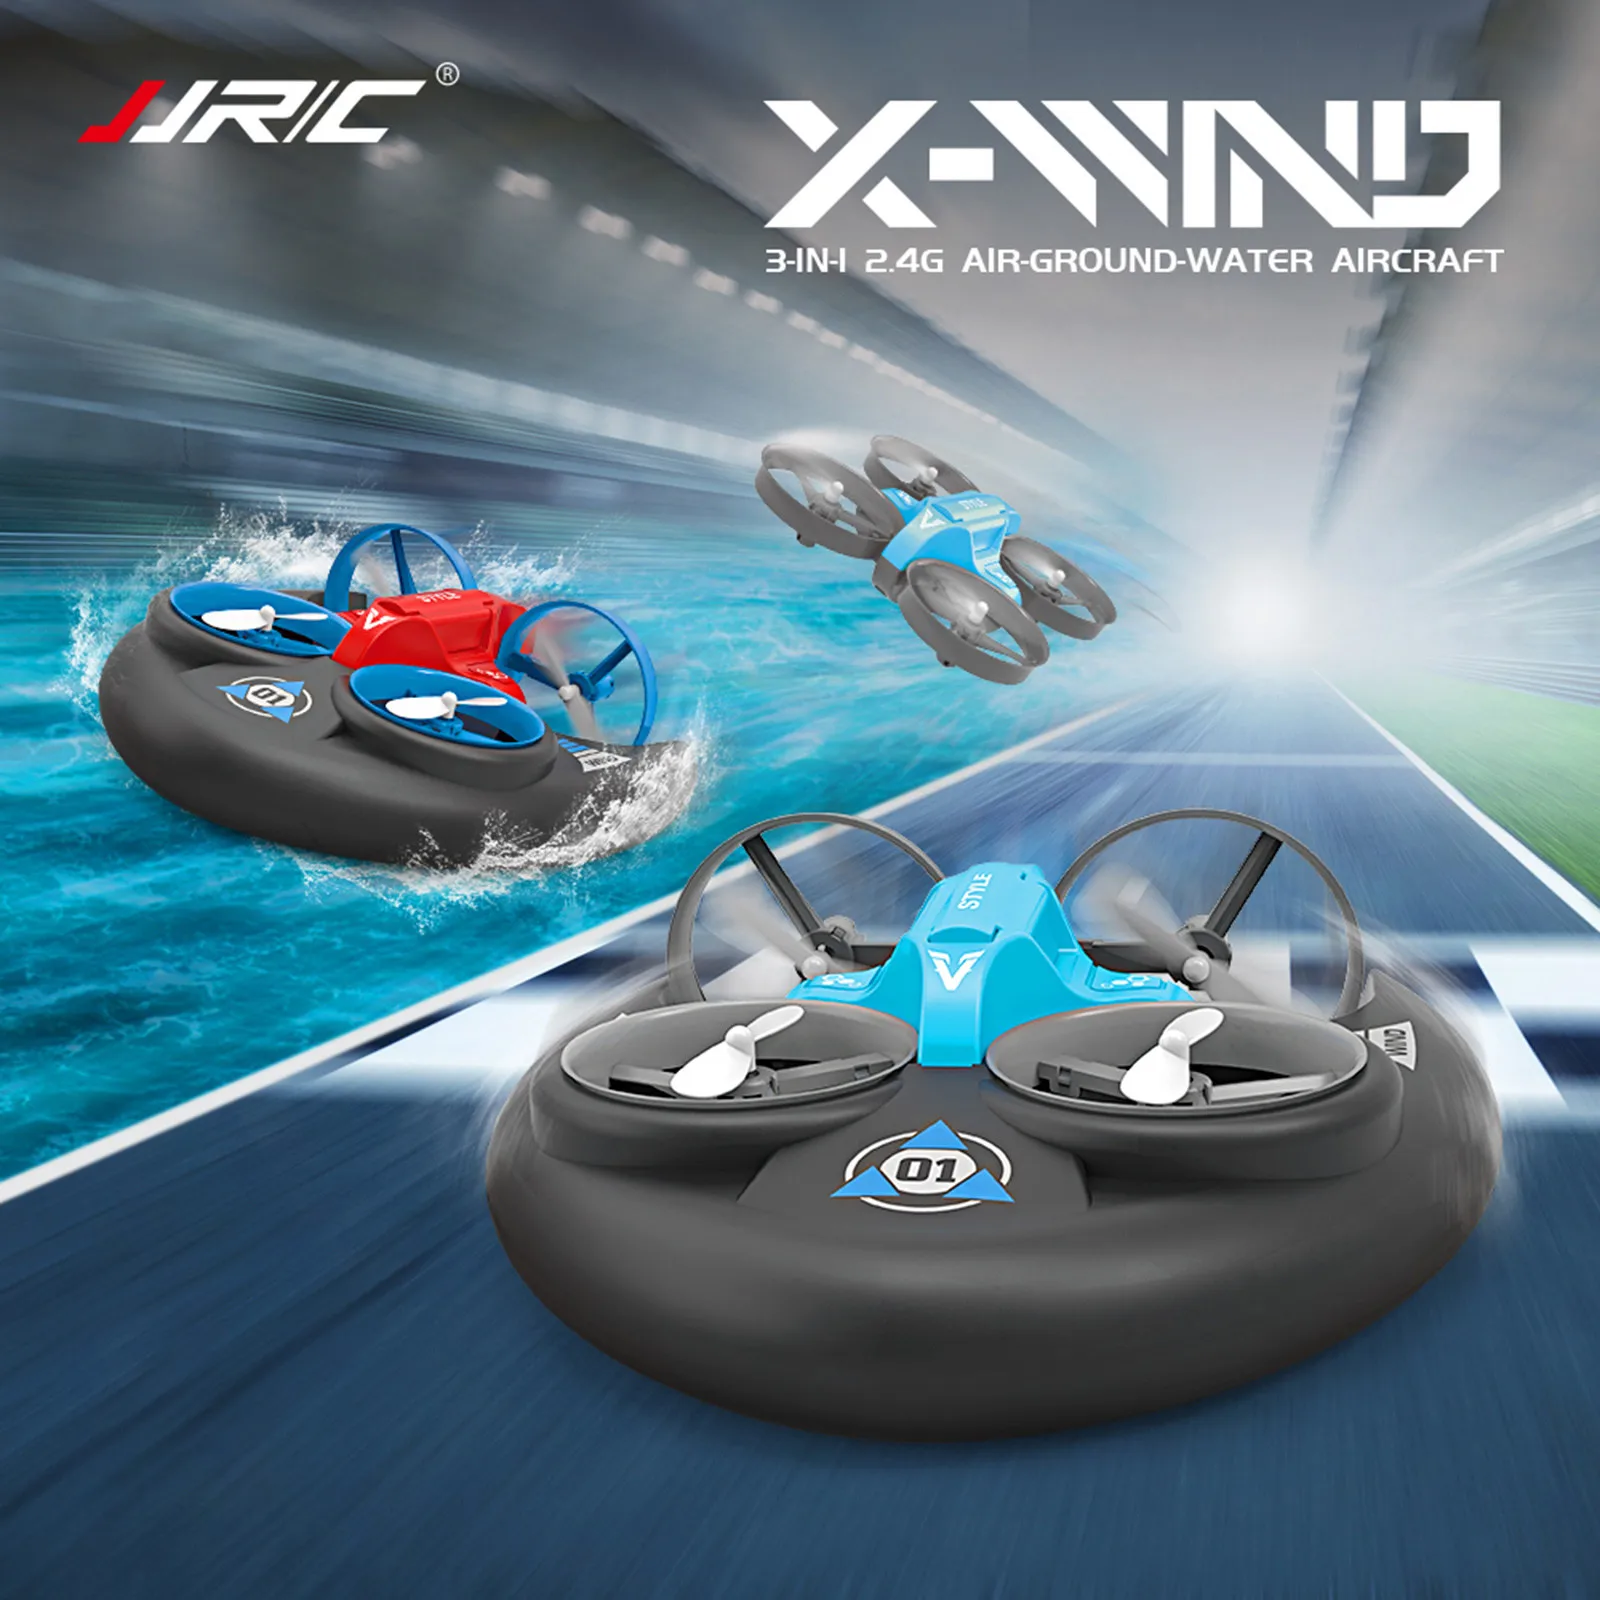 Jjrc h101 2 4g rc water land and air four axis flying hovercraft remote control vehicle thumb200